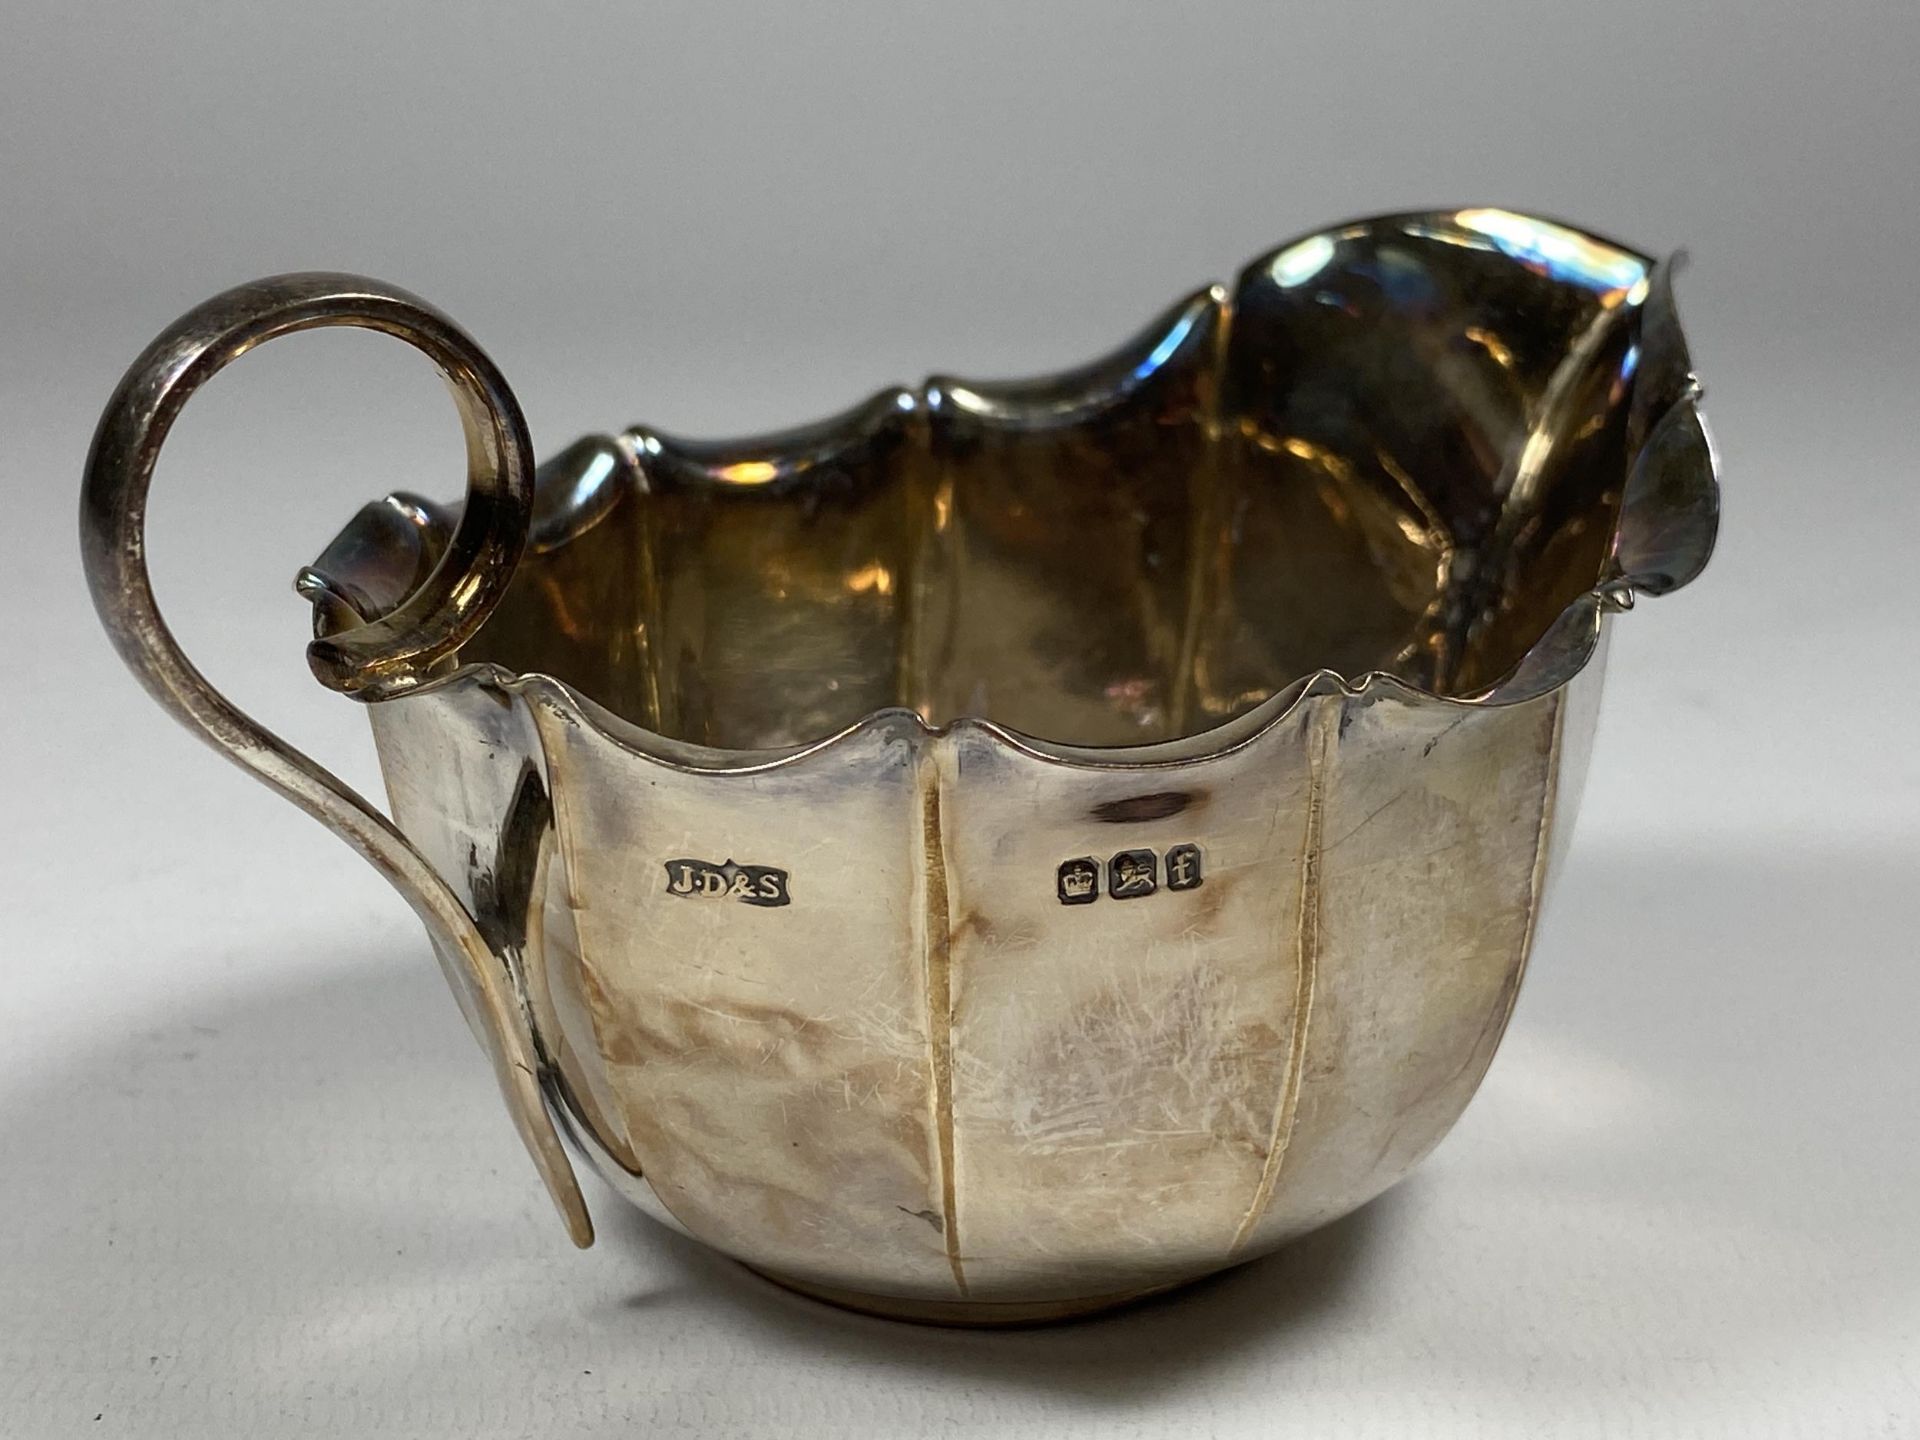 A GEORGE V SILVER FLUTED CREAM JUG, HALLMARKS FOR SHEFFIELD, 1923, MAKERS JAMES DIXON & SONS - Image 3 of 3